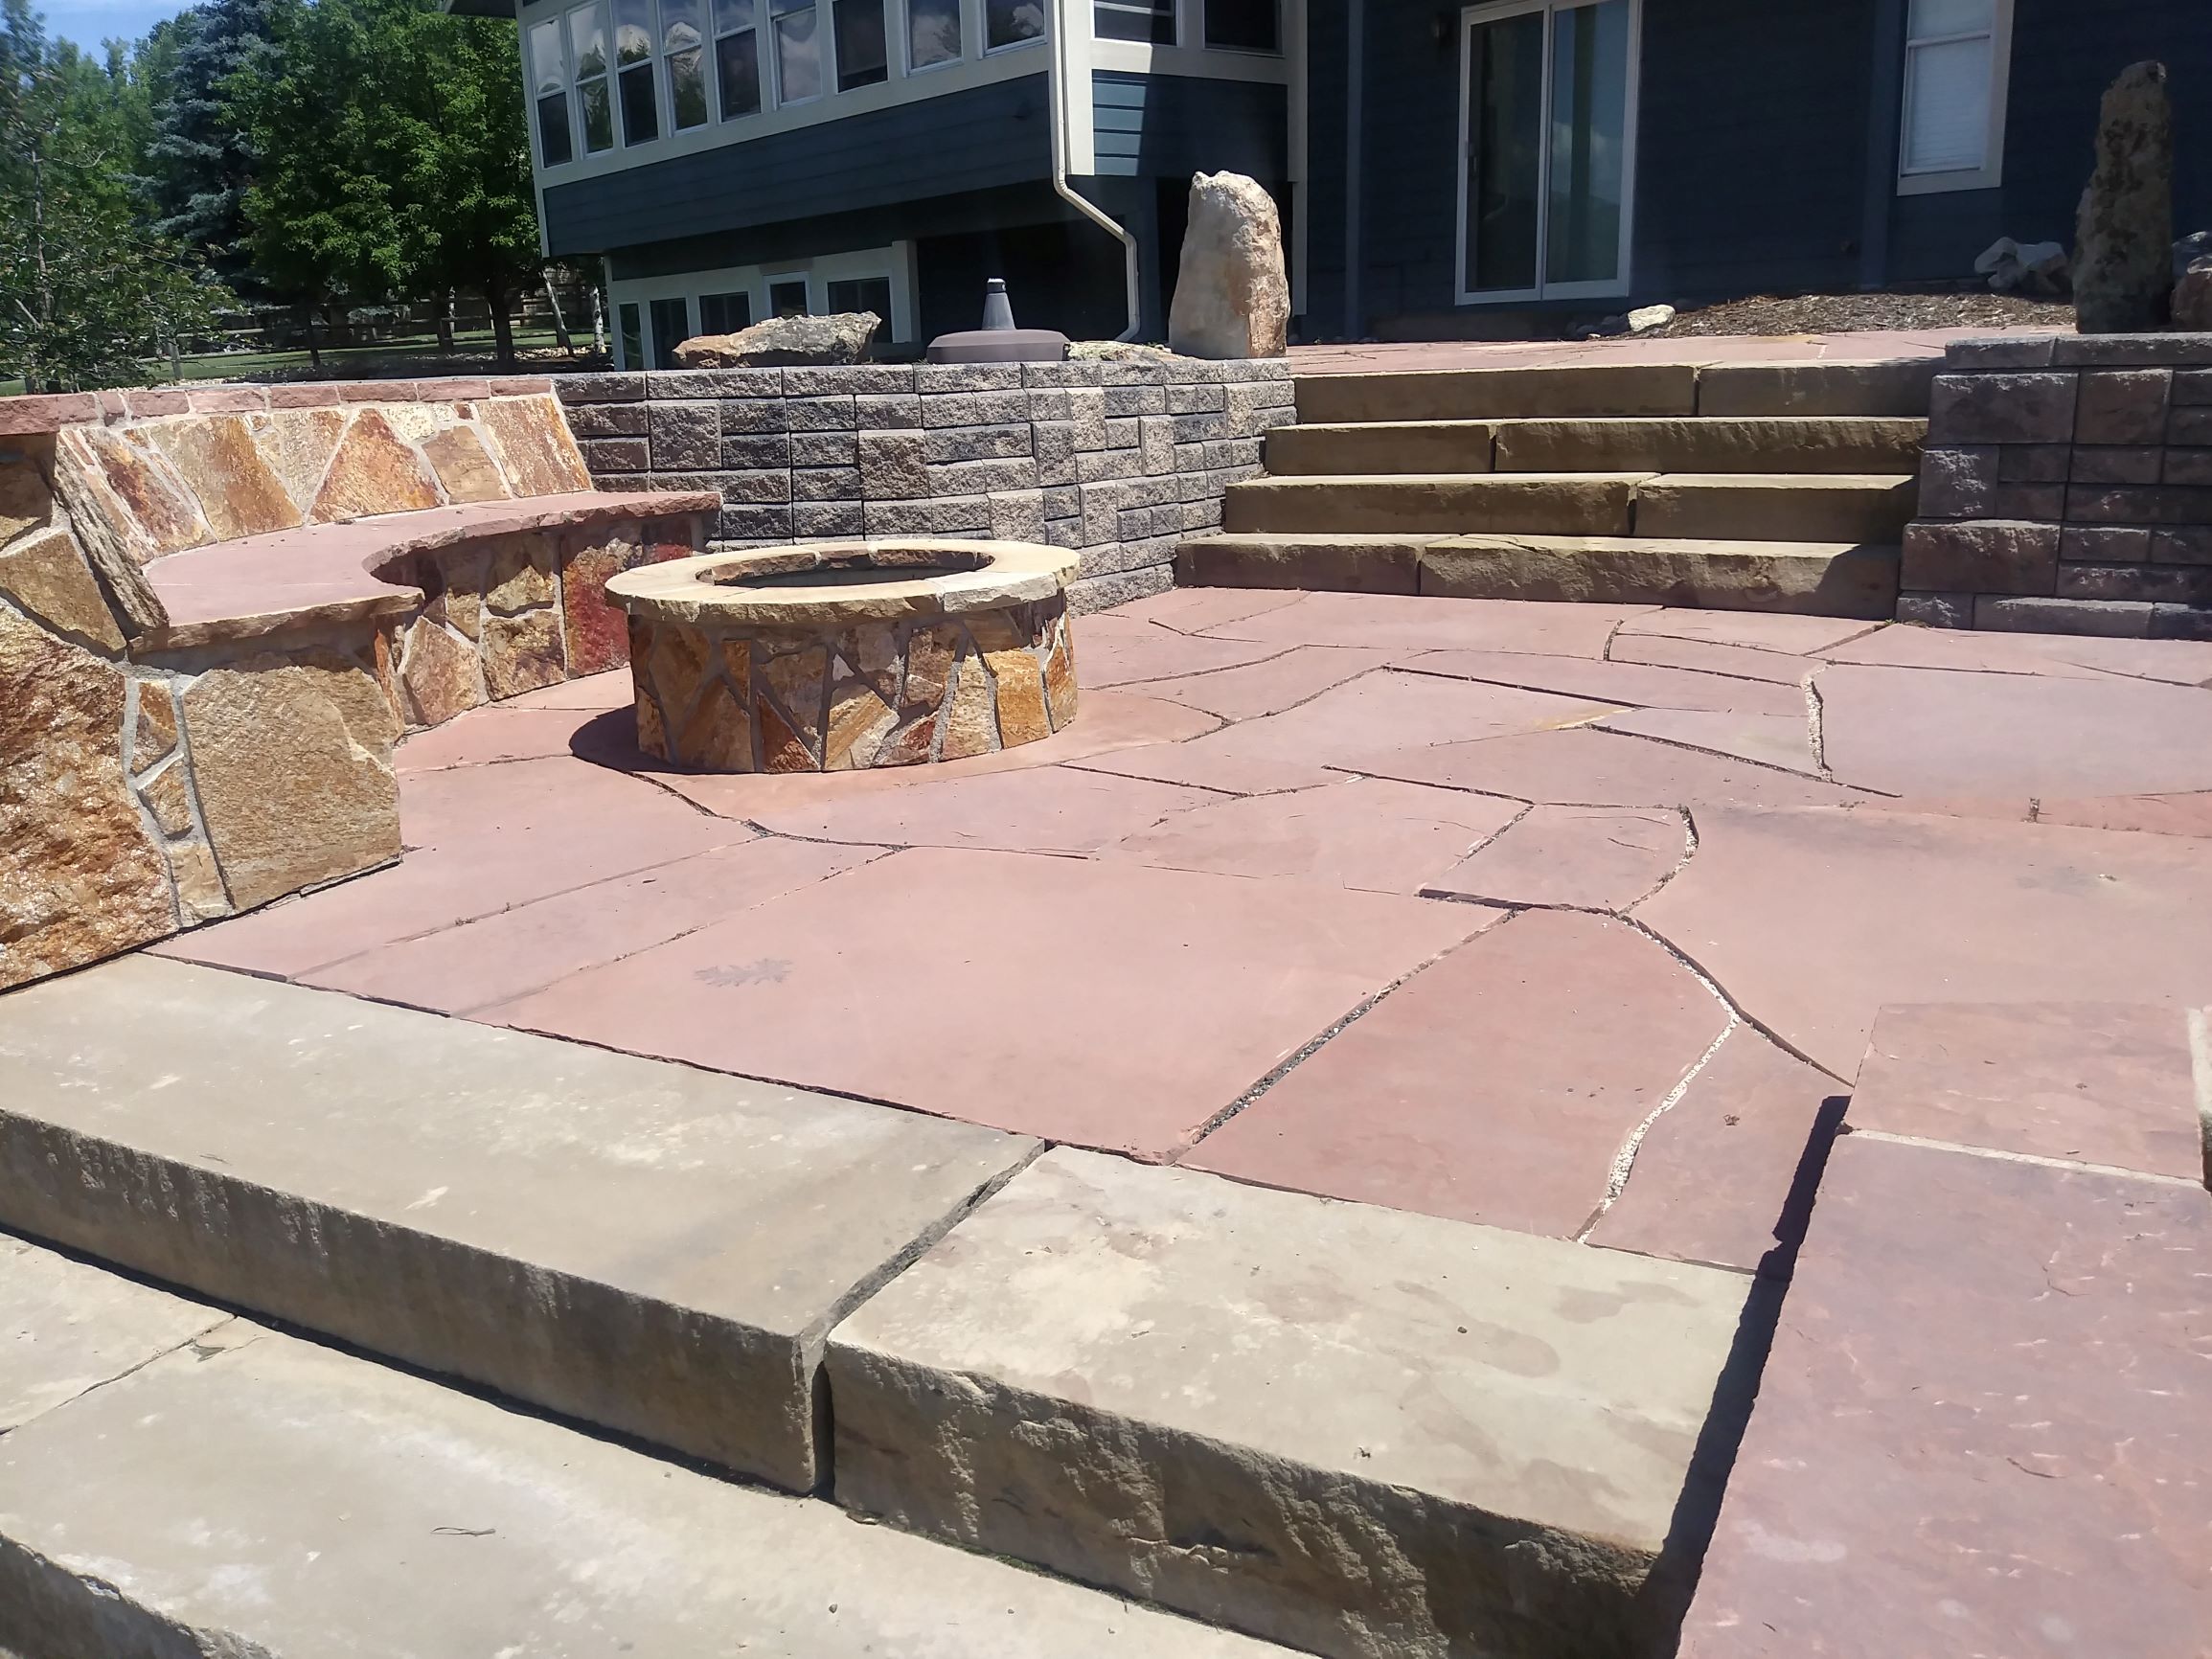 Flat stone patio with fire pit and bench seating. flat stone steps down to patio.